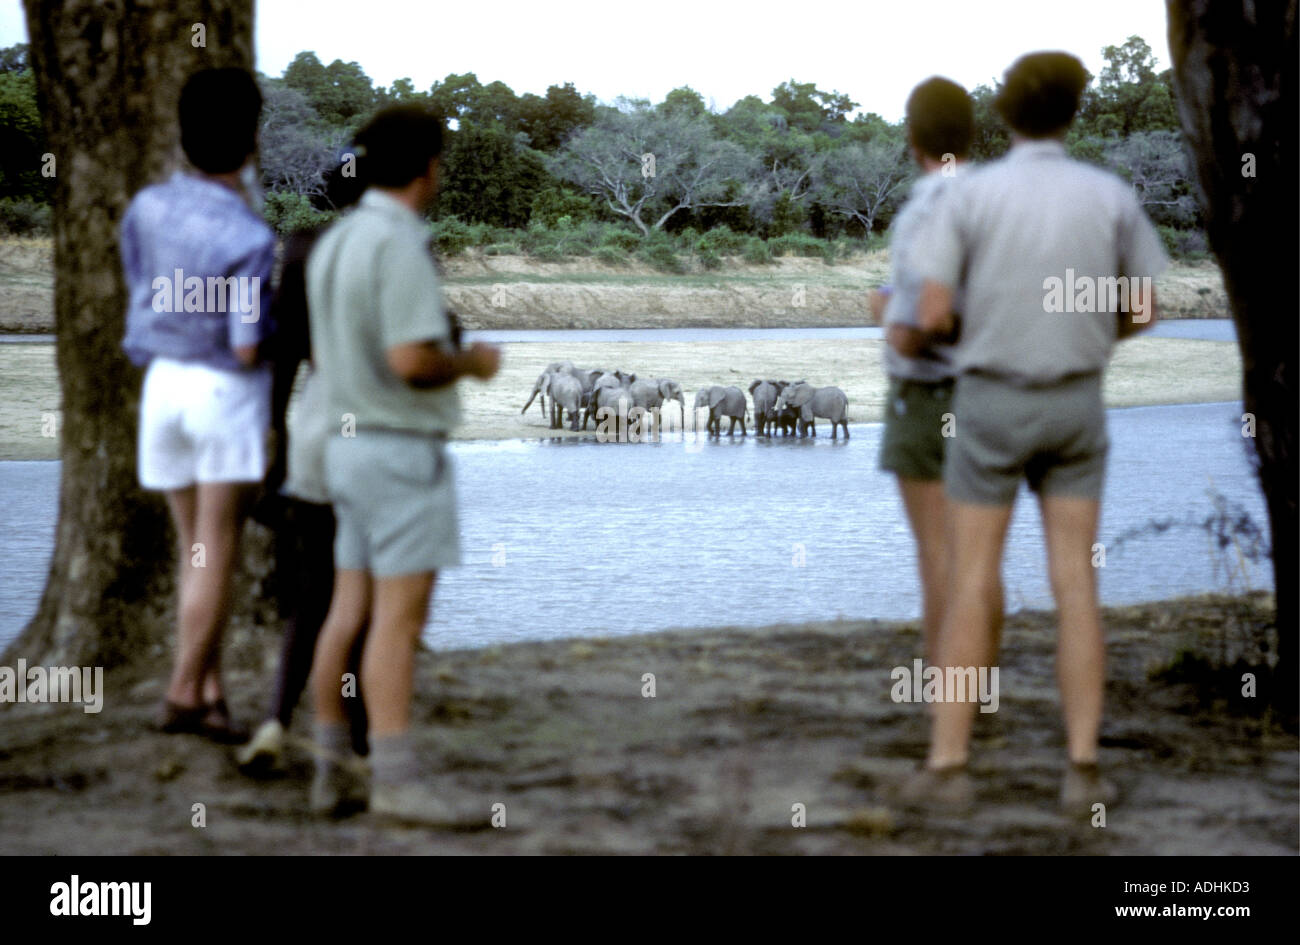 Tourist viewing elephants in the Luangwa River South Luangwa National Park Zambia Stock Photo